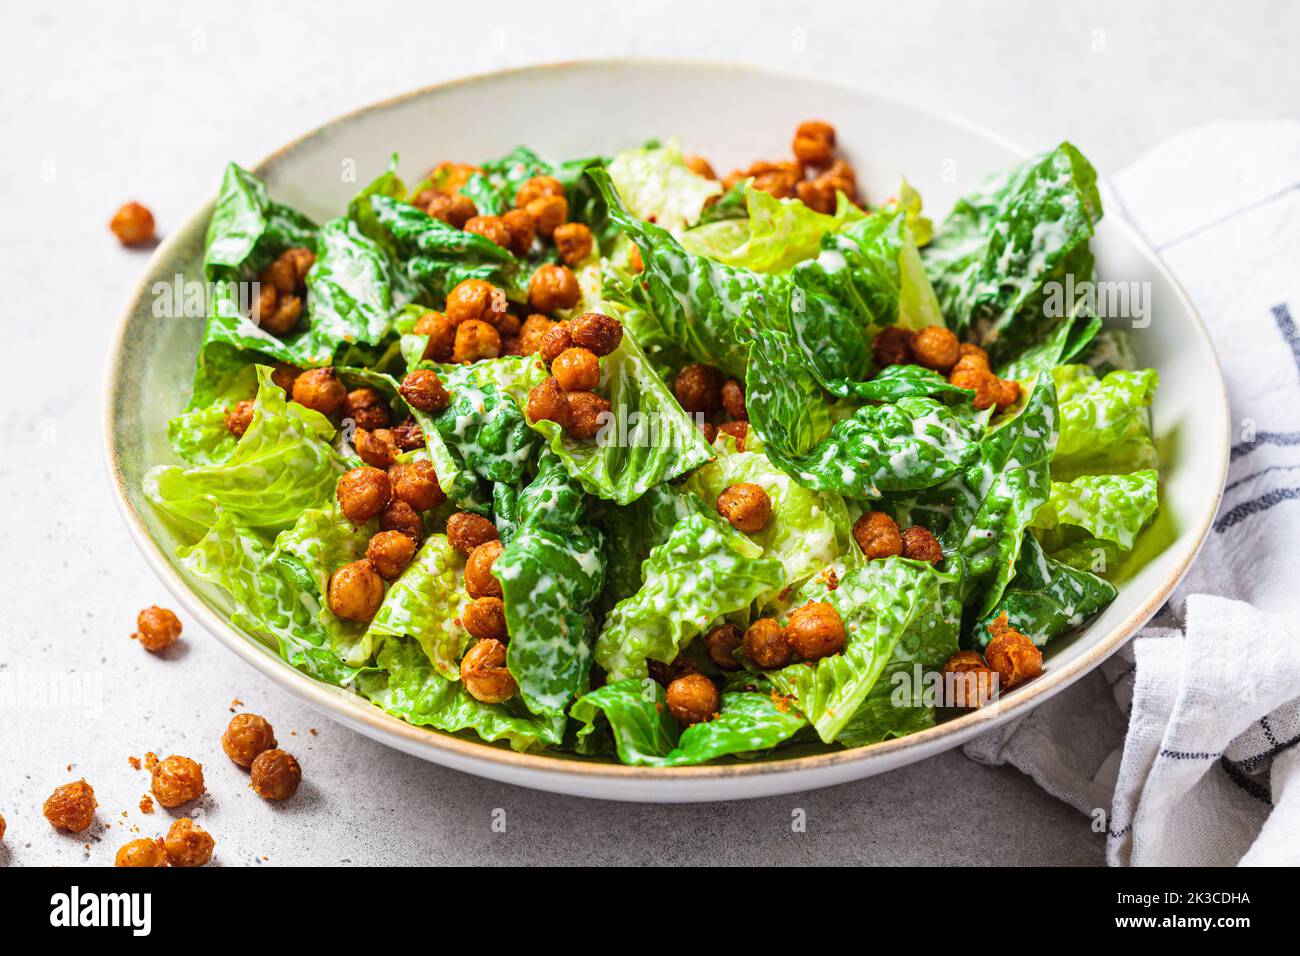 Vegan caesar salad with fried spicy chickpeas in a gray bowl. Plant based food concept. Stock Photo